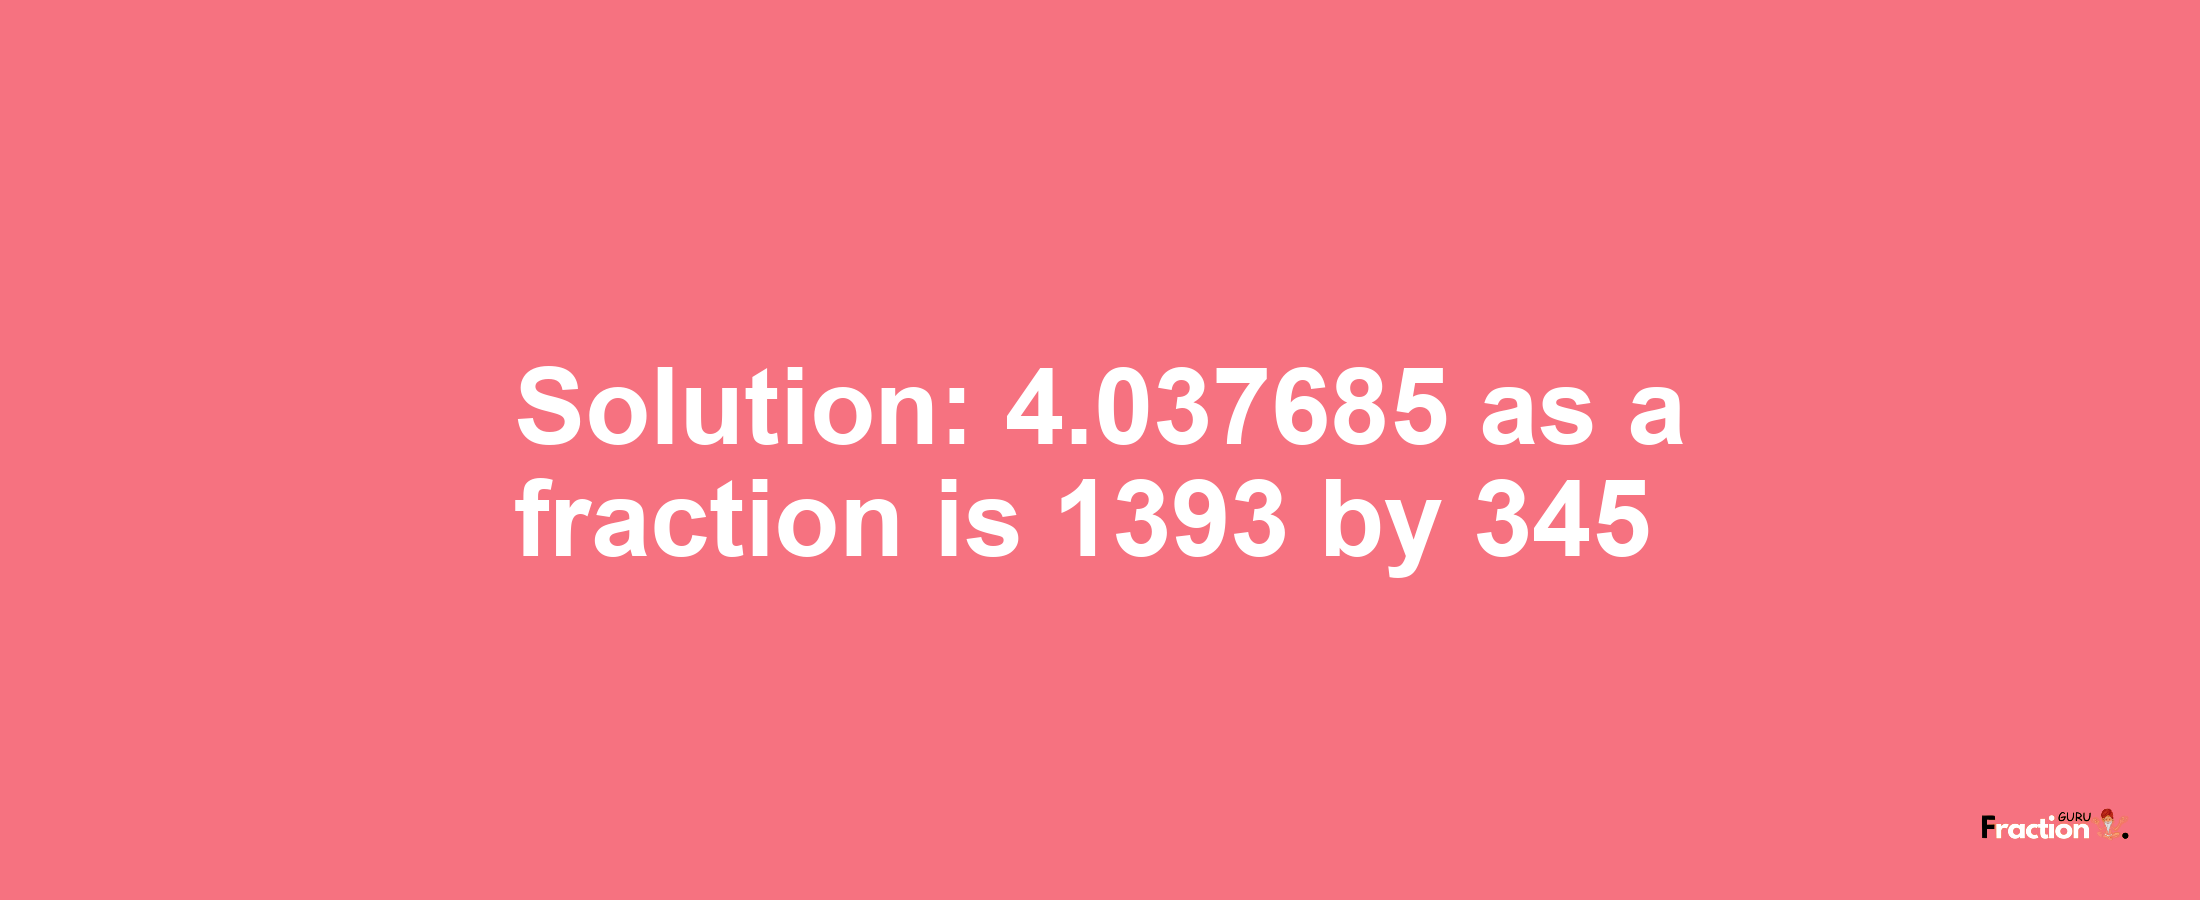 Solution:4.037685 as a fraction is 1393/345